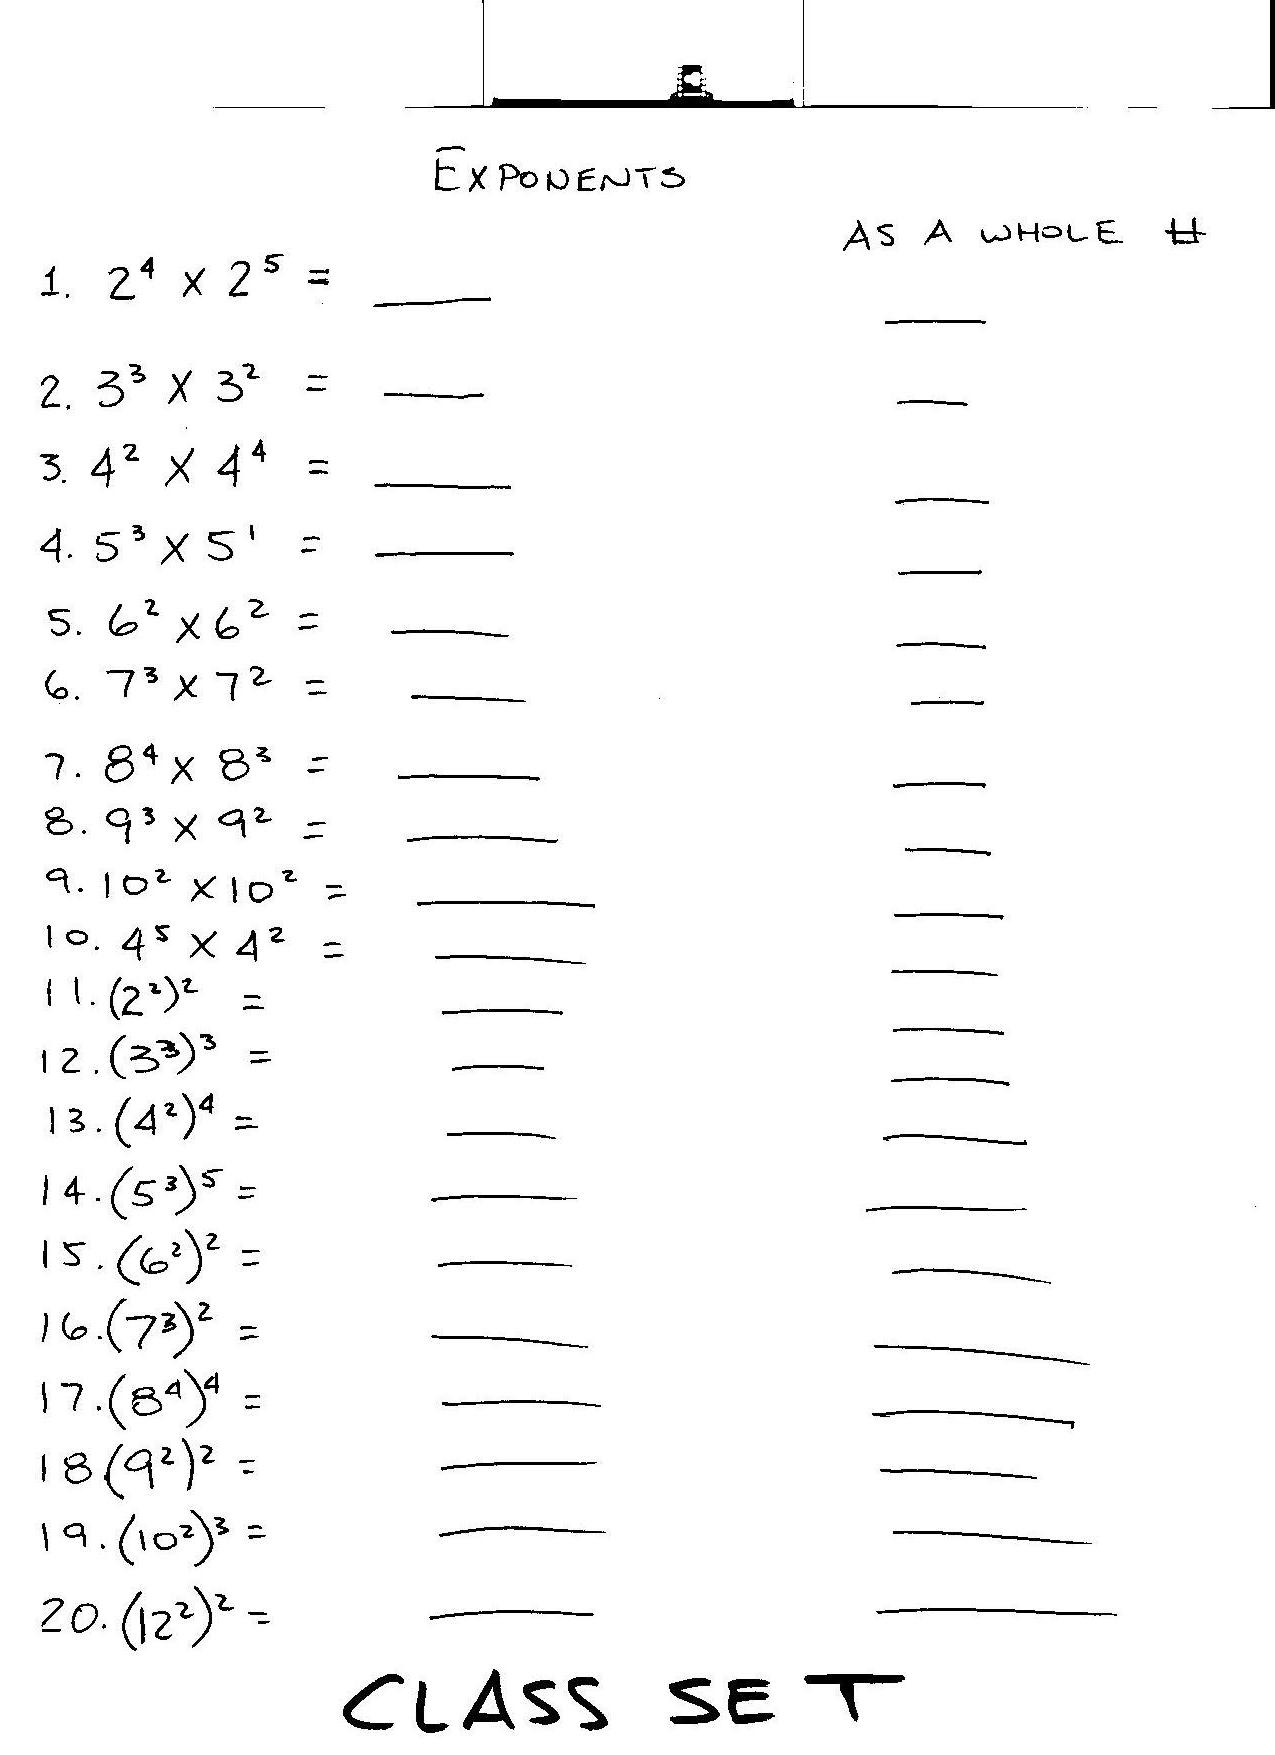 11 Best Images Of 8th Grade Exponents Worksheets Exponents Worksheets Exponents Worksheets